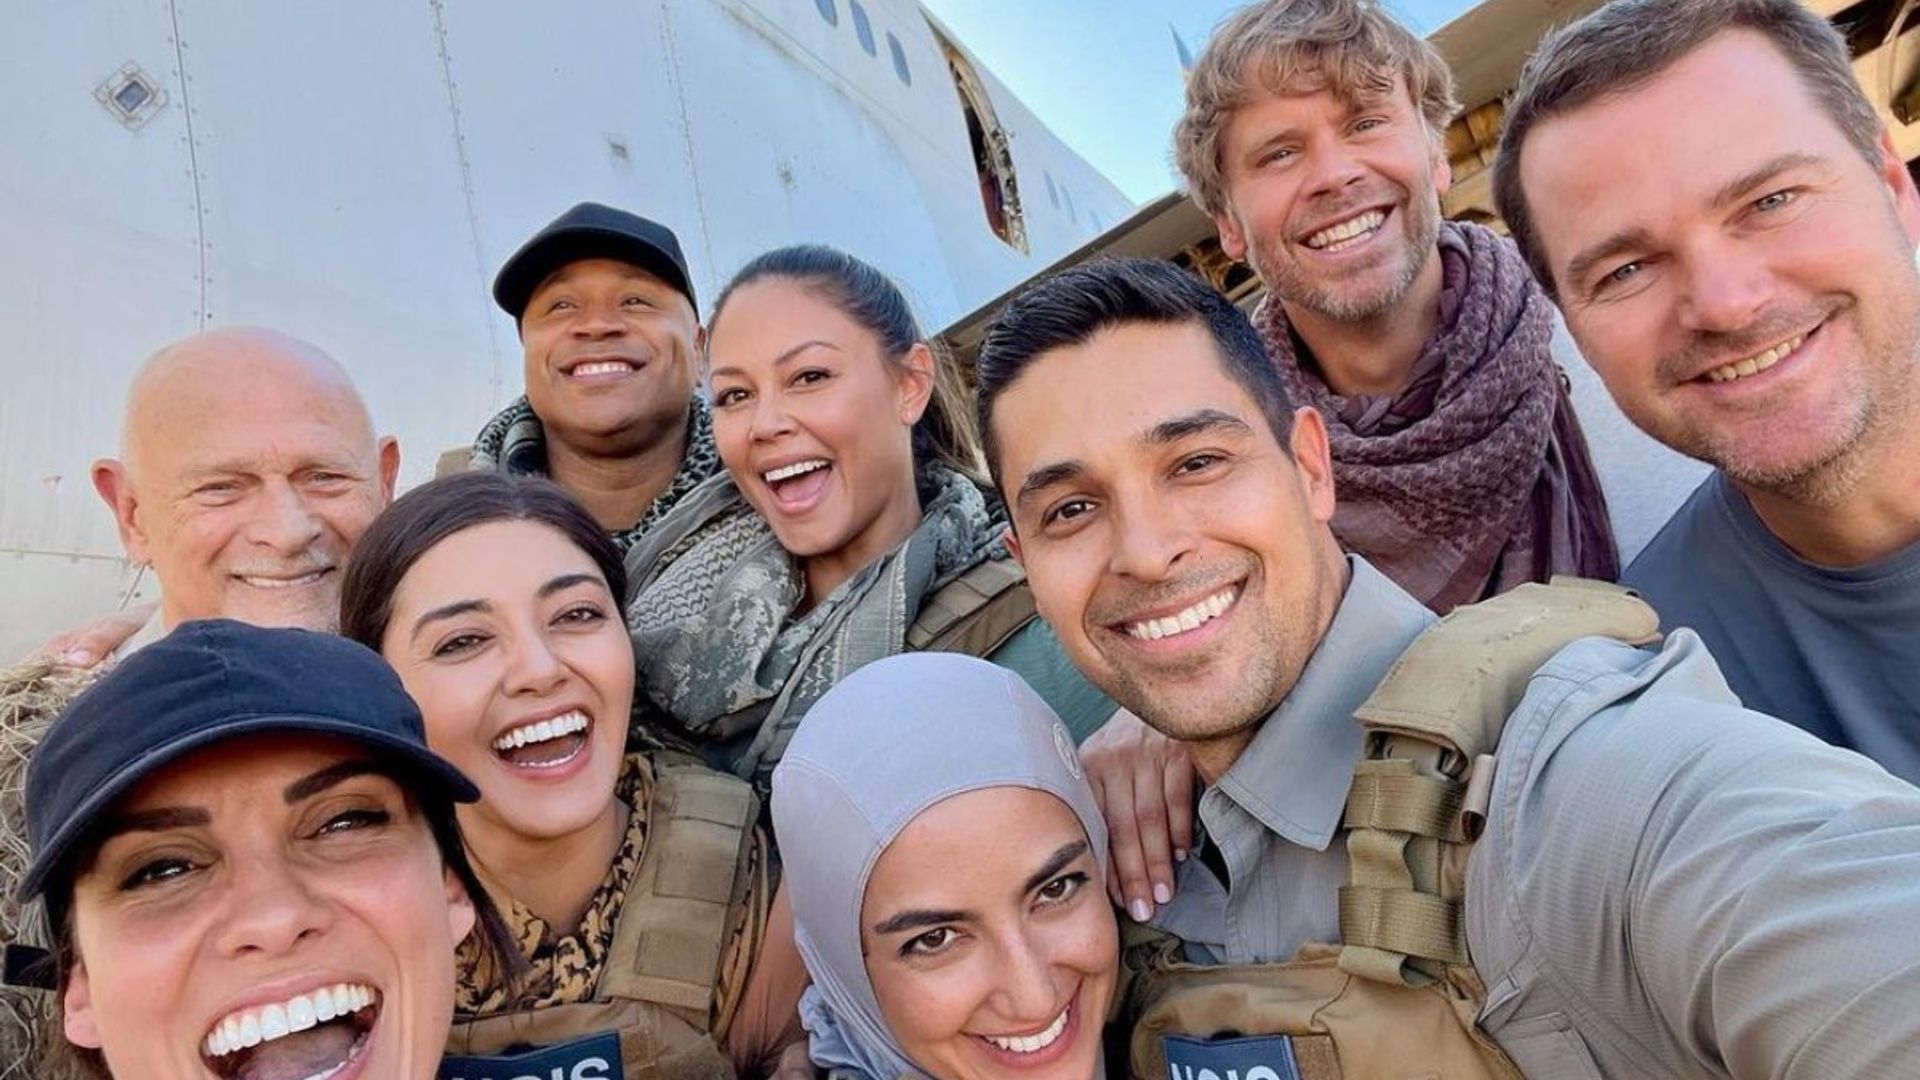 NCIS star Wilmer Valderrama shares epic photo from crossover filming